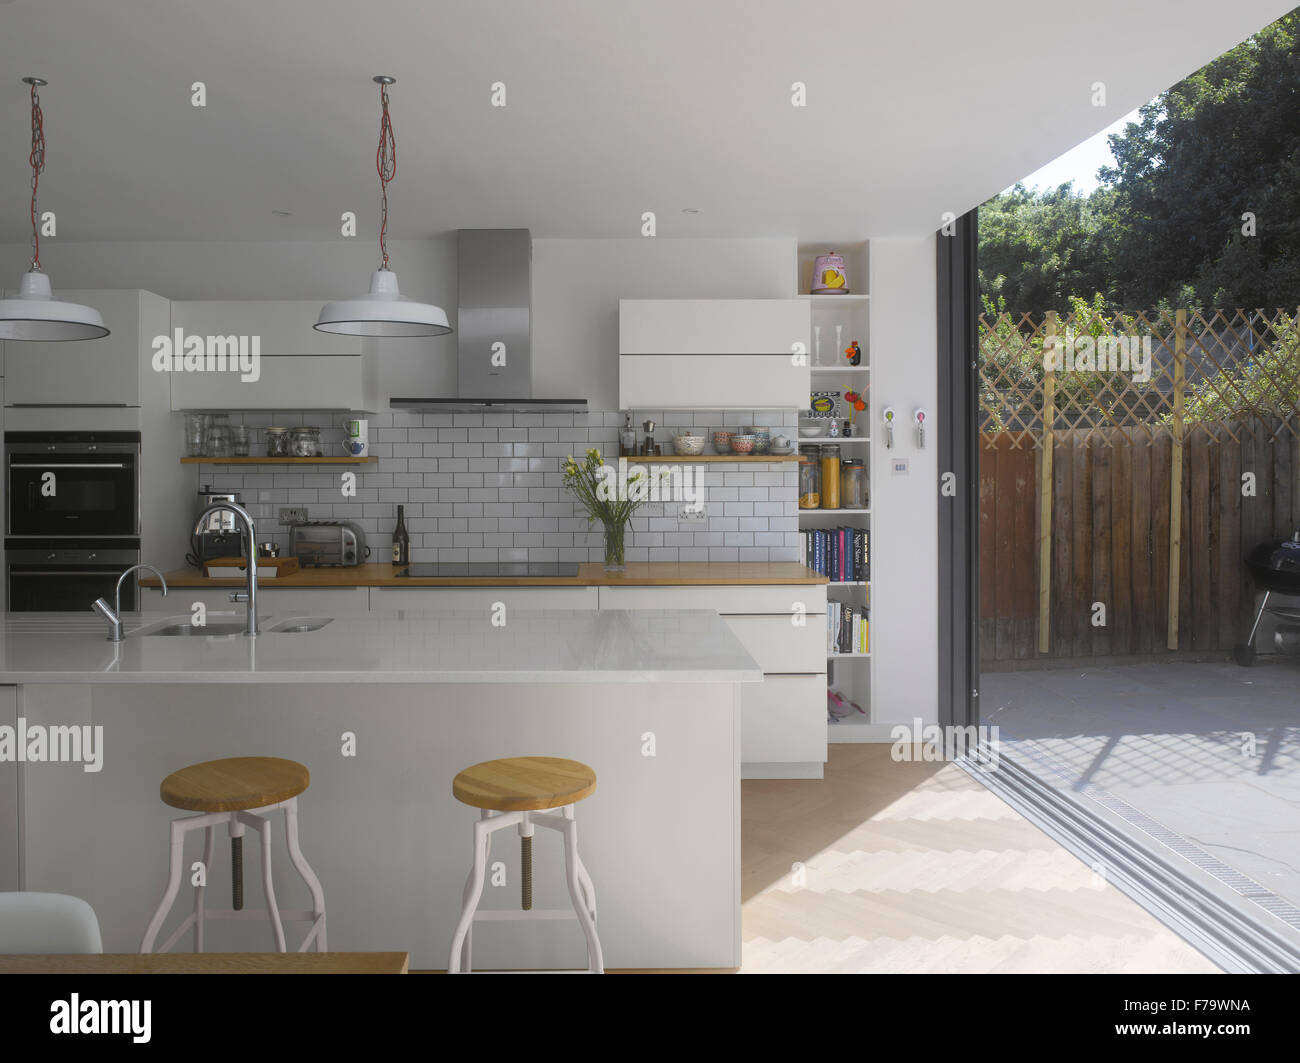 Kitchen And With Sliding Door To Garden In UK Home Stock Photo